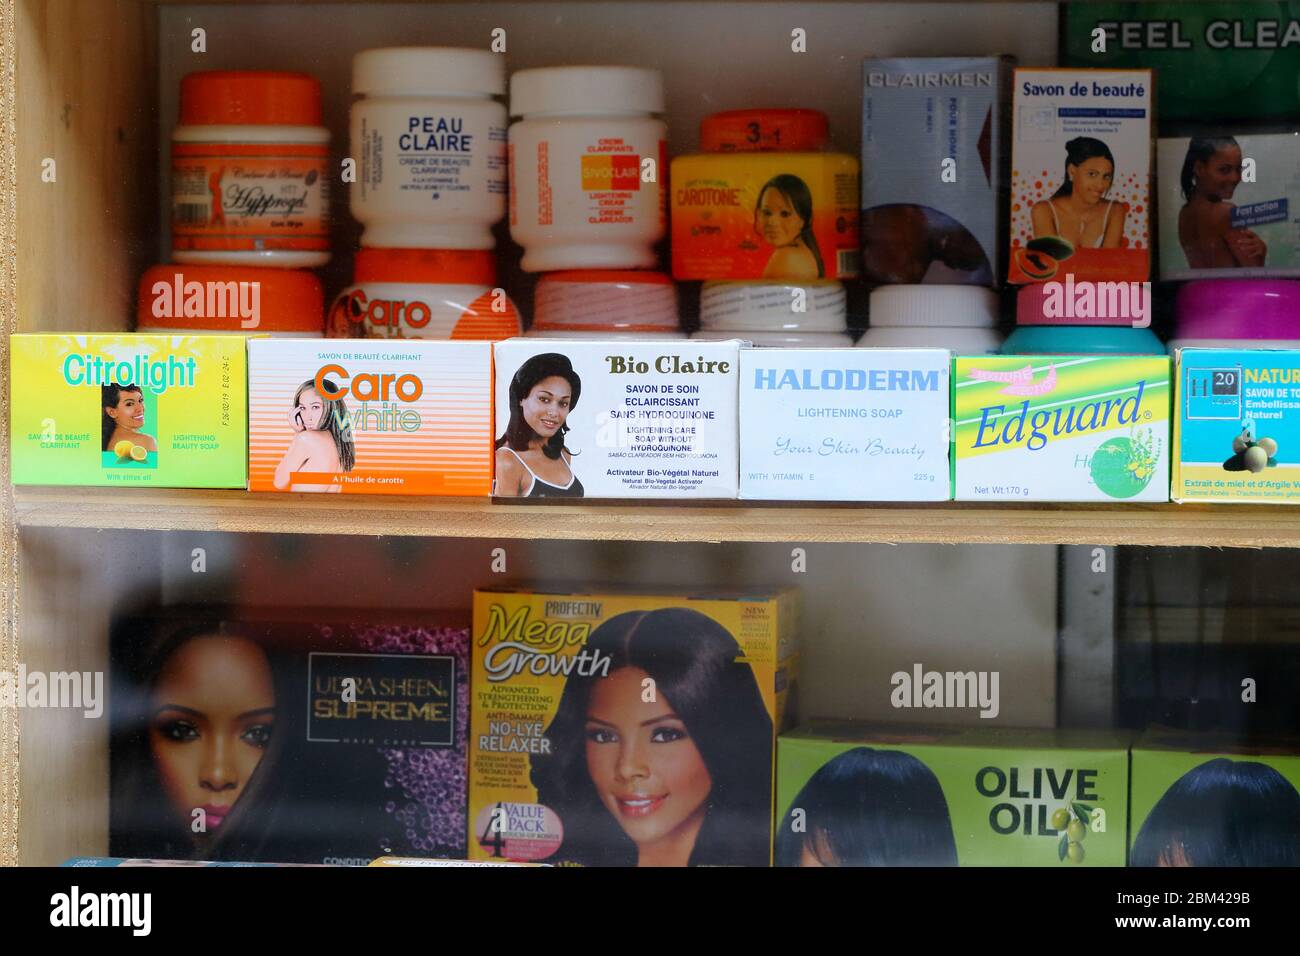 Skin lightening soaps and beauty products in a shop window display. Stock Photo